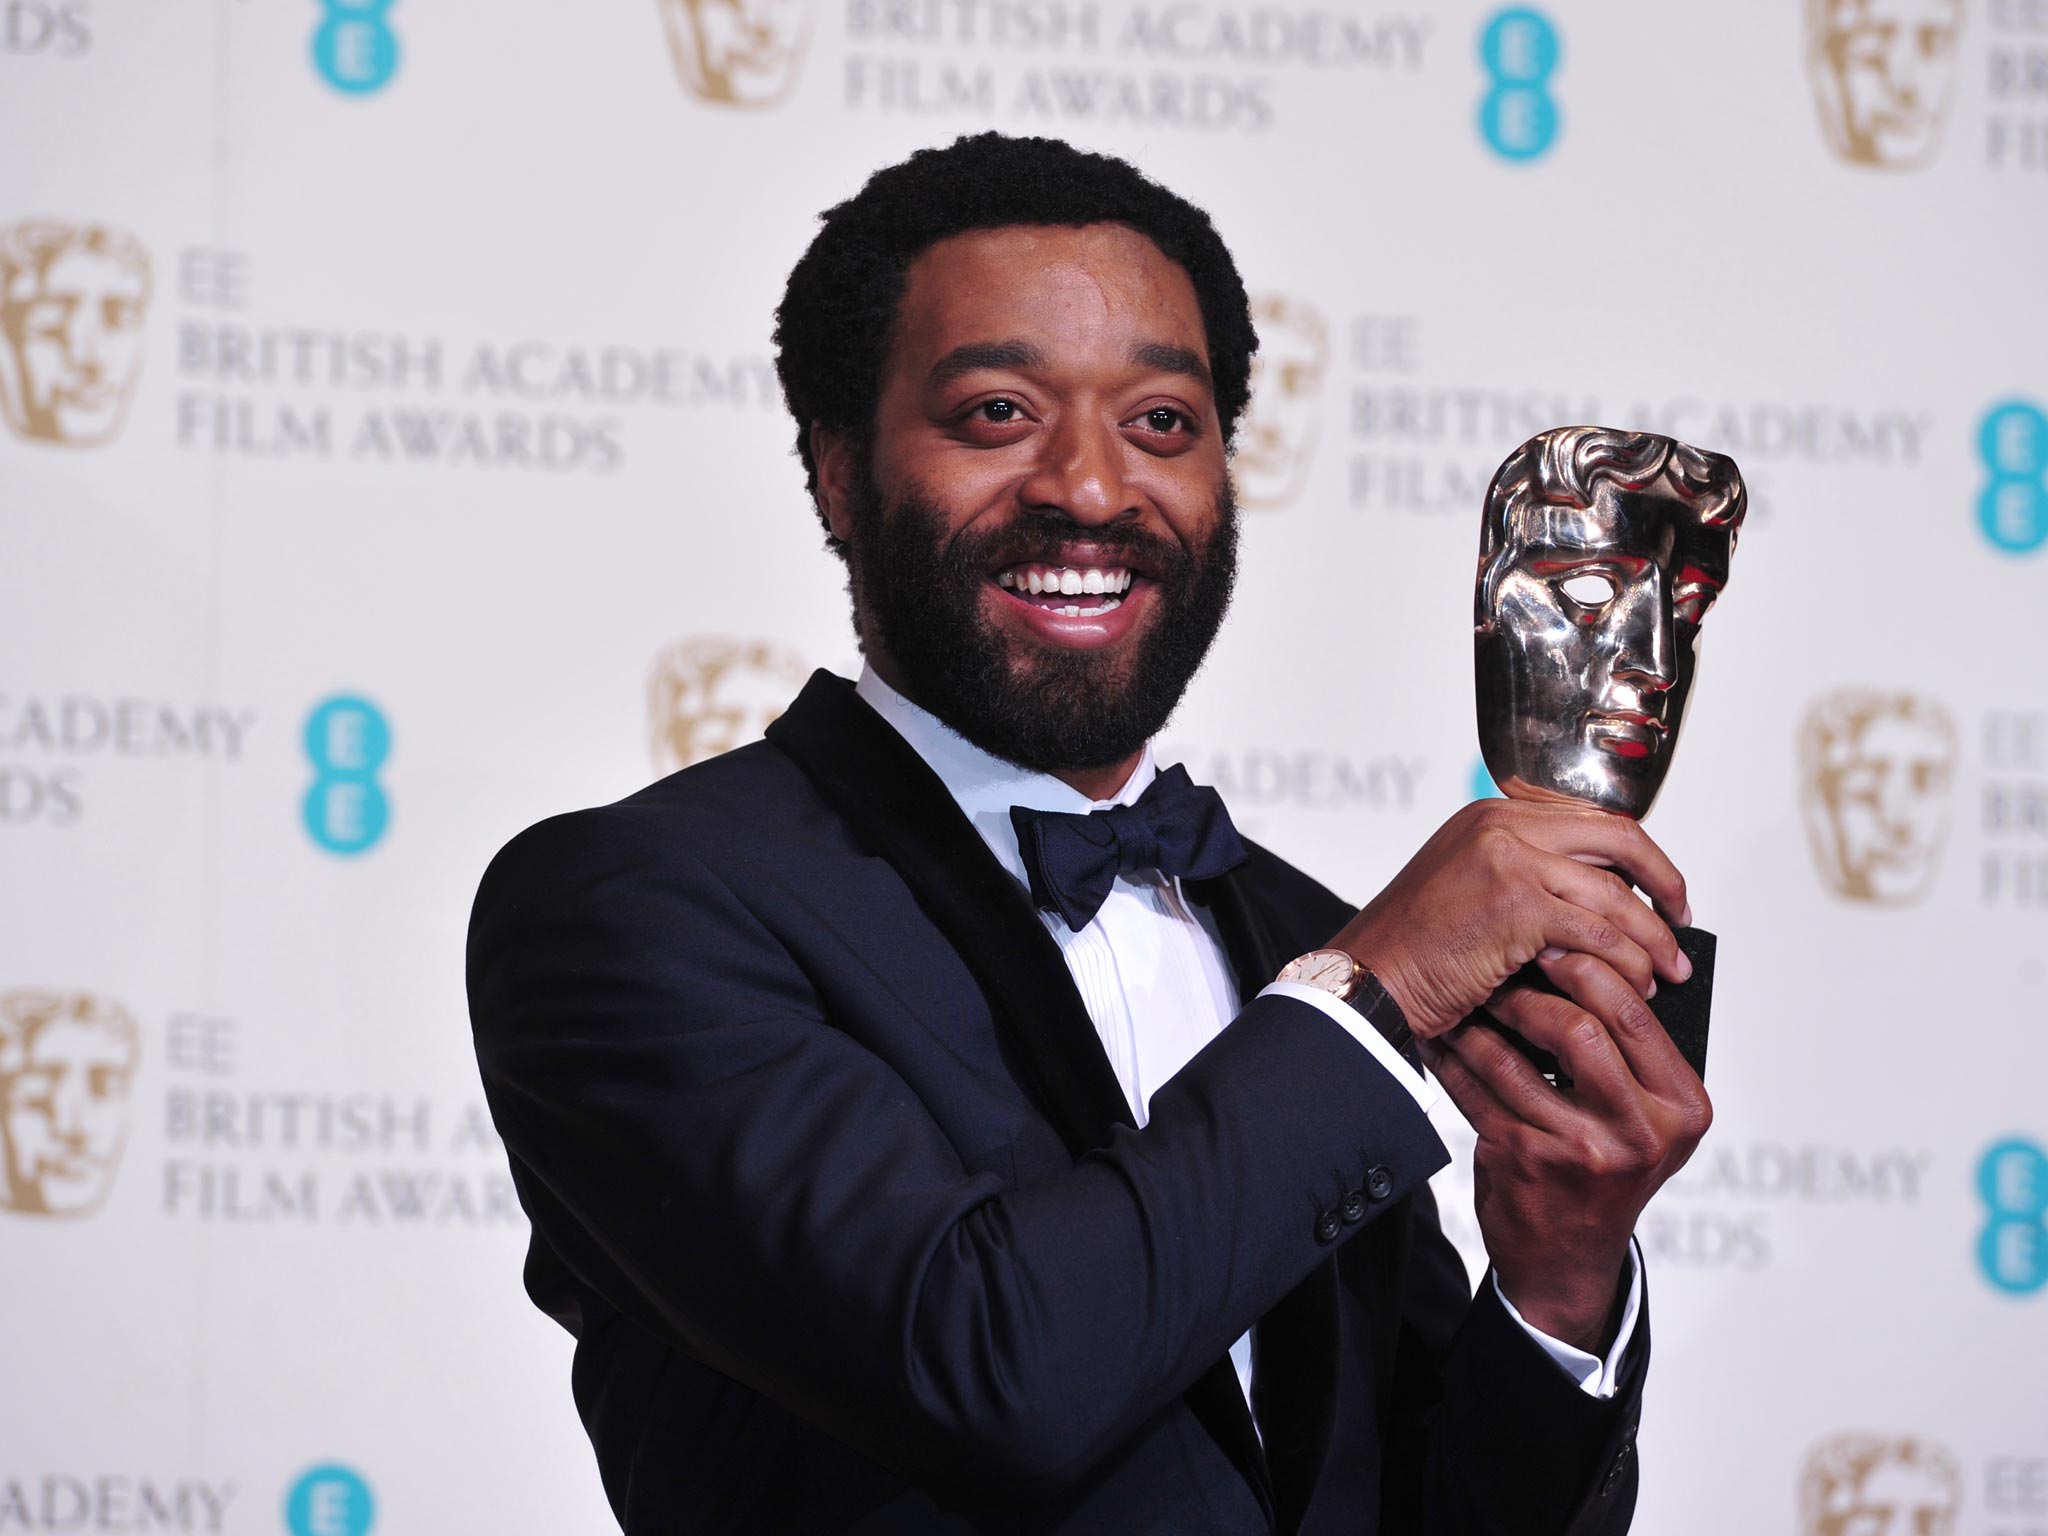 Chiwetel Ejiofor poses with the award for a leading actor for his work on the film '12 Years a Slave' 